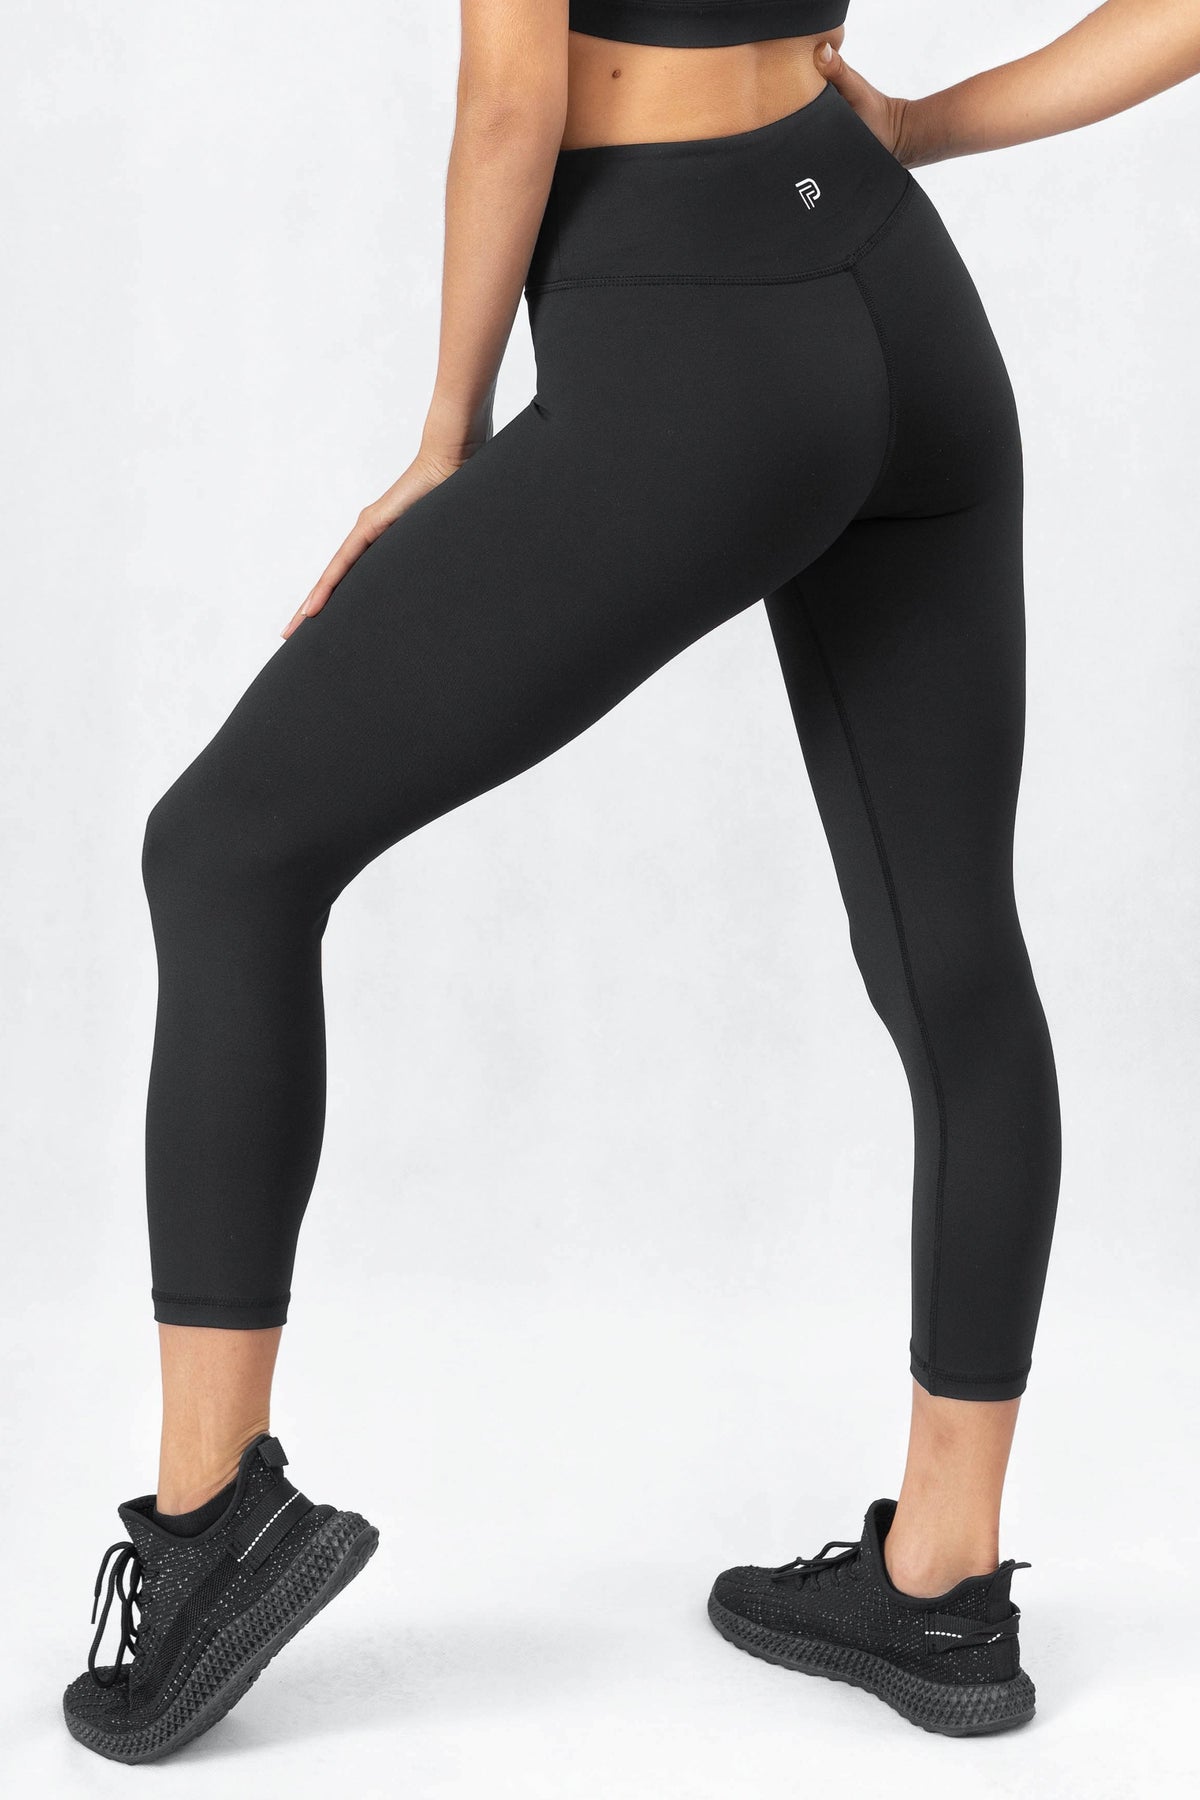 Squat Proof Leggings Part 4: Fabletics High-Waisted PowerHold 7/8